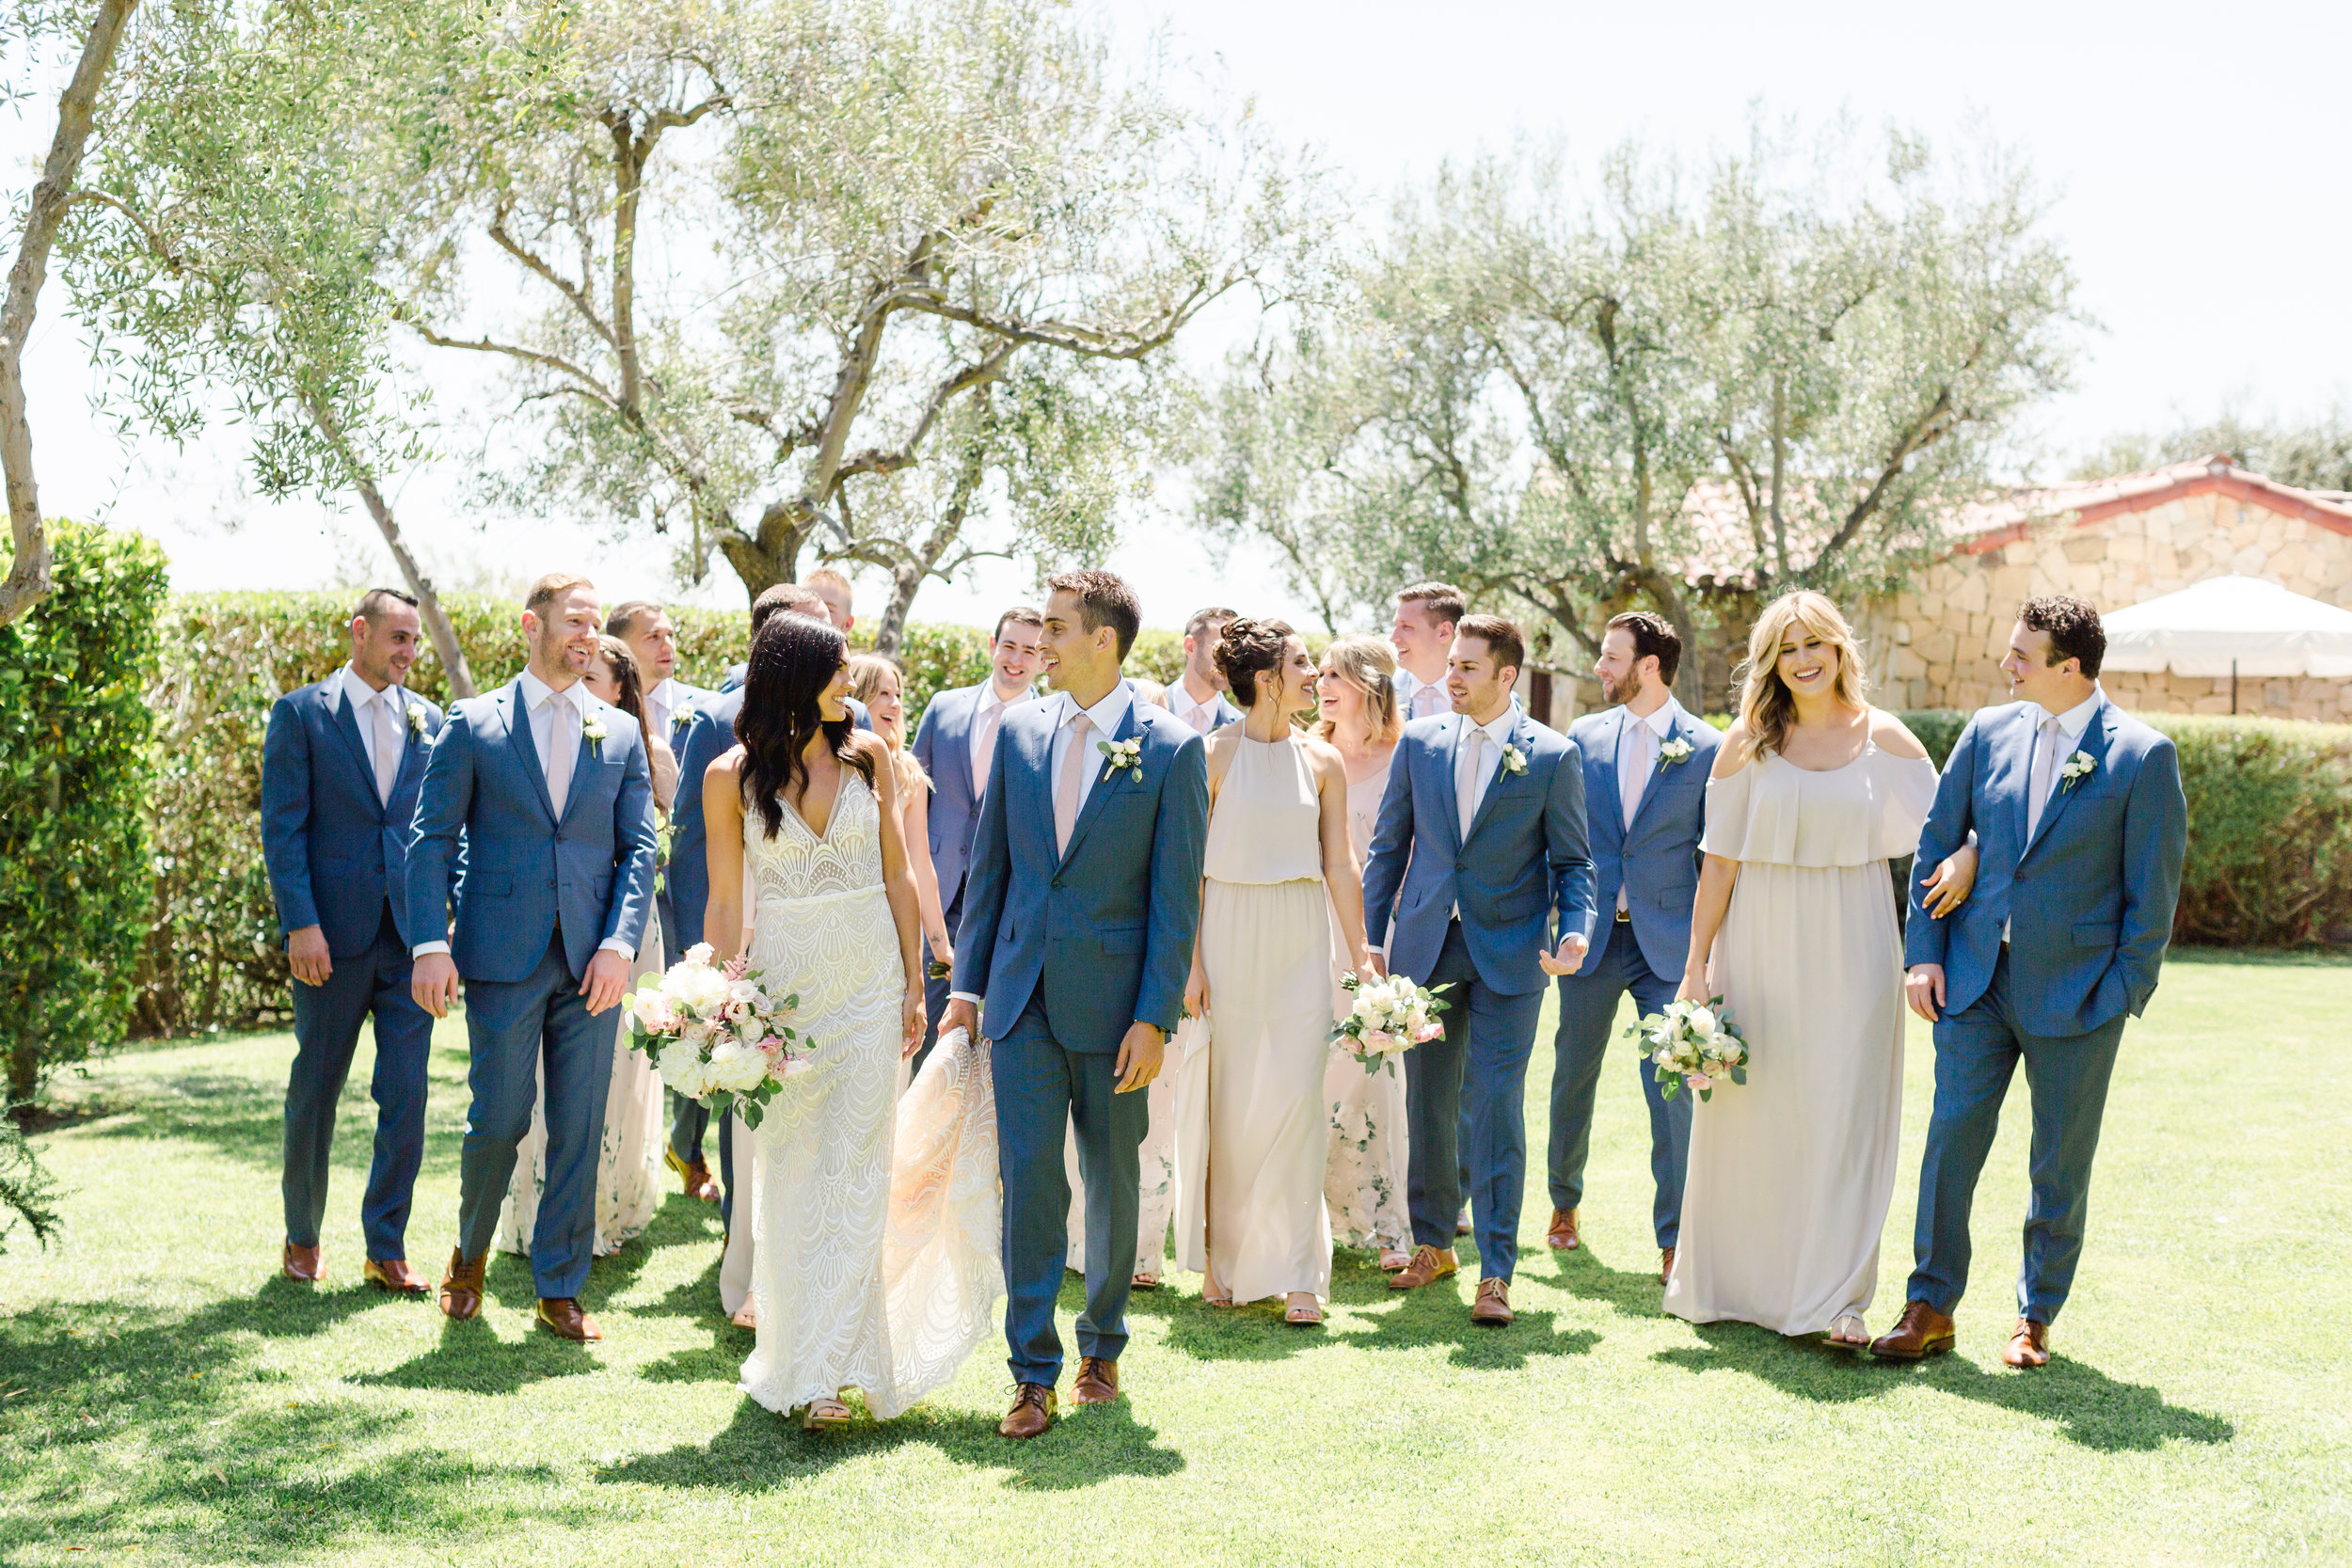 Bride and groom walking with their bridal party on a lawn surrounded by olive trees.